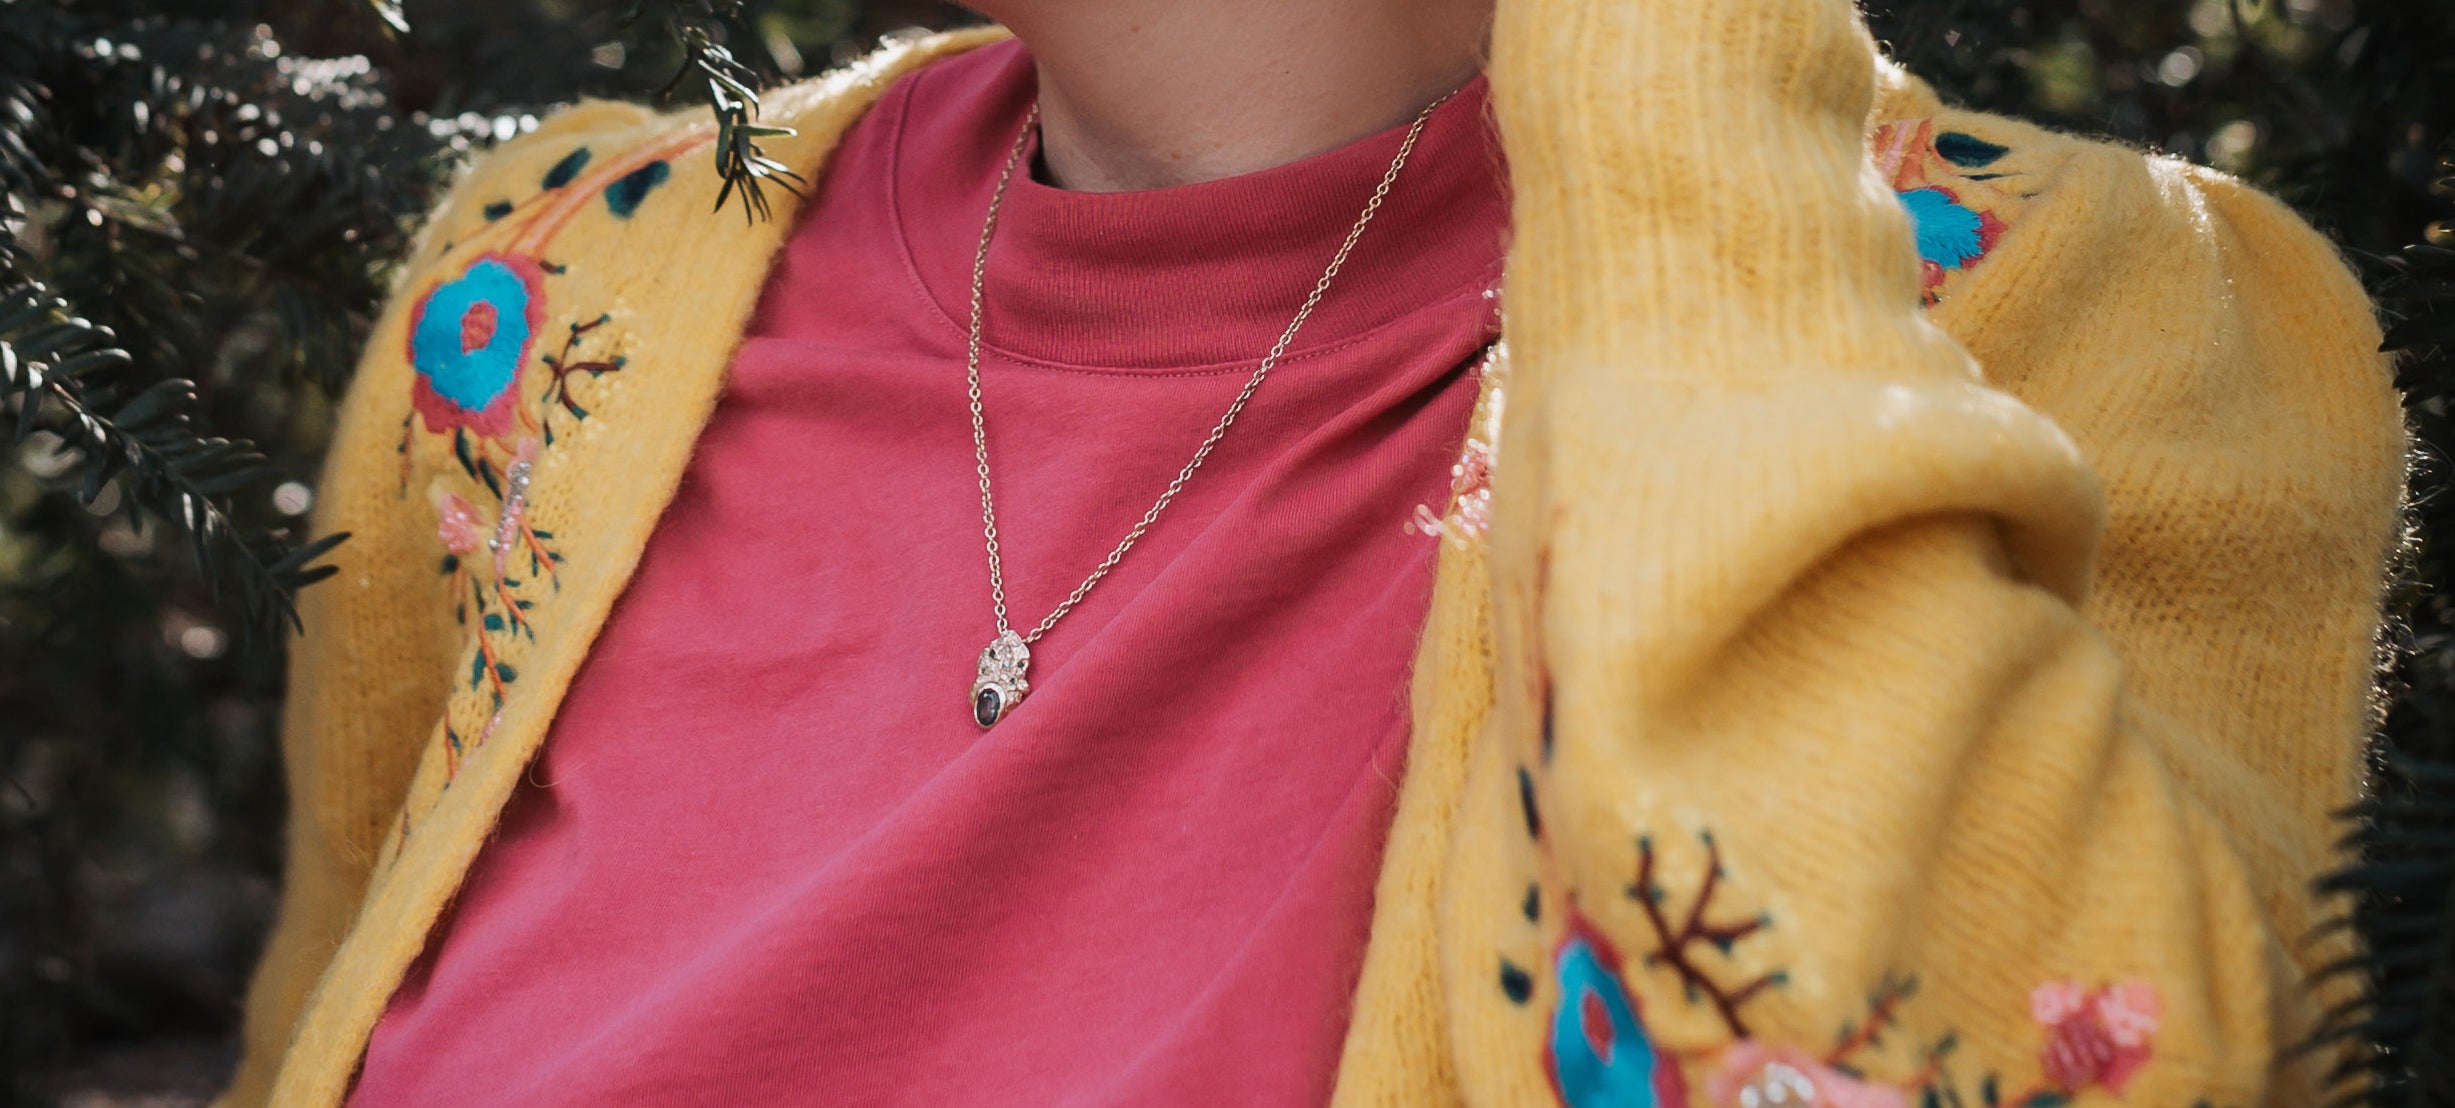 Woman wearing a pink tshirt and yellow cardigan, and a handmade gold necklace by independent jeweller Issy White